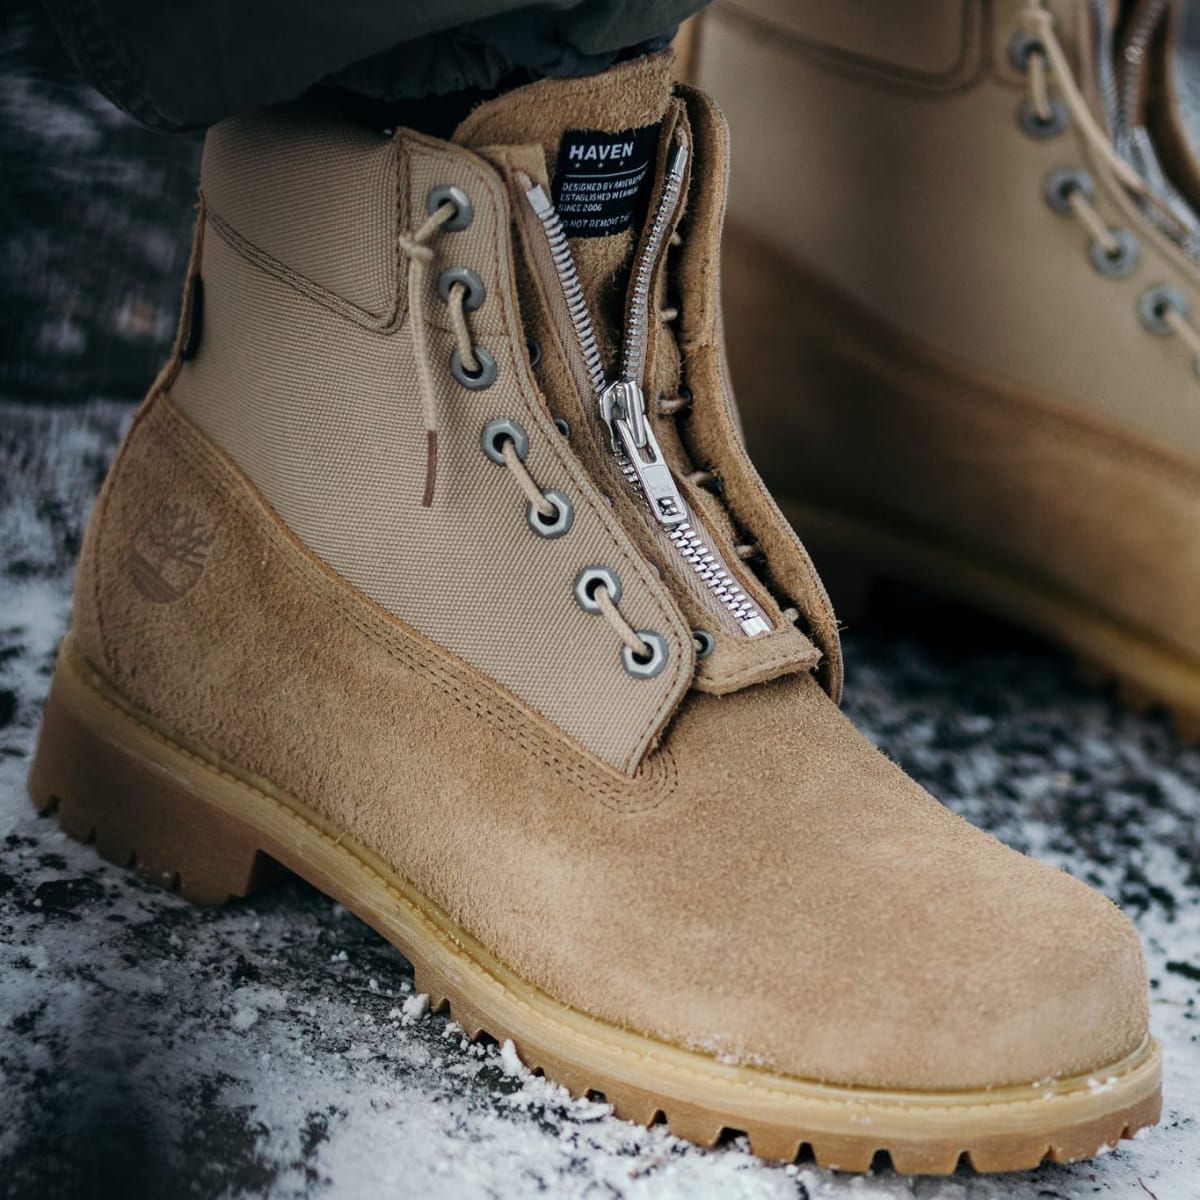 Haven brings a technical, military-inspired twist to Timberland's